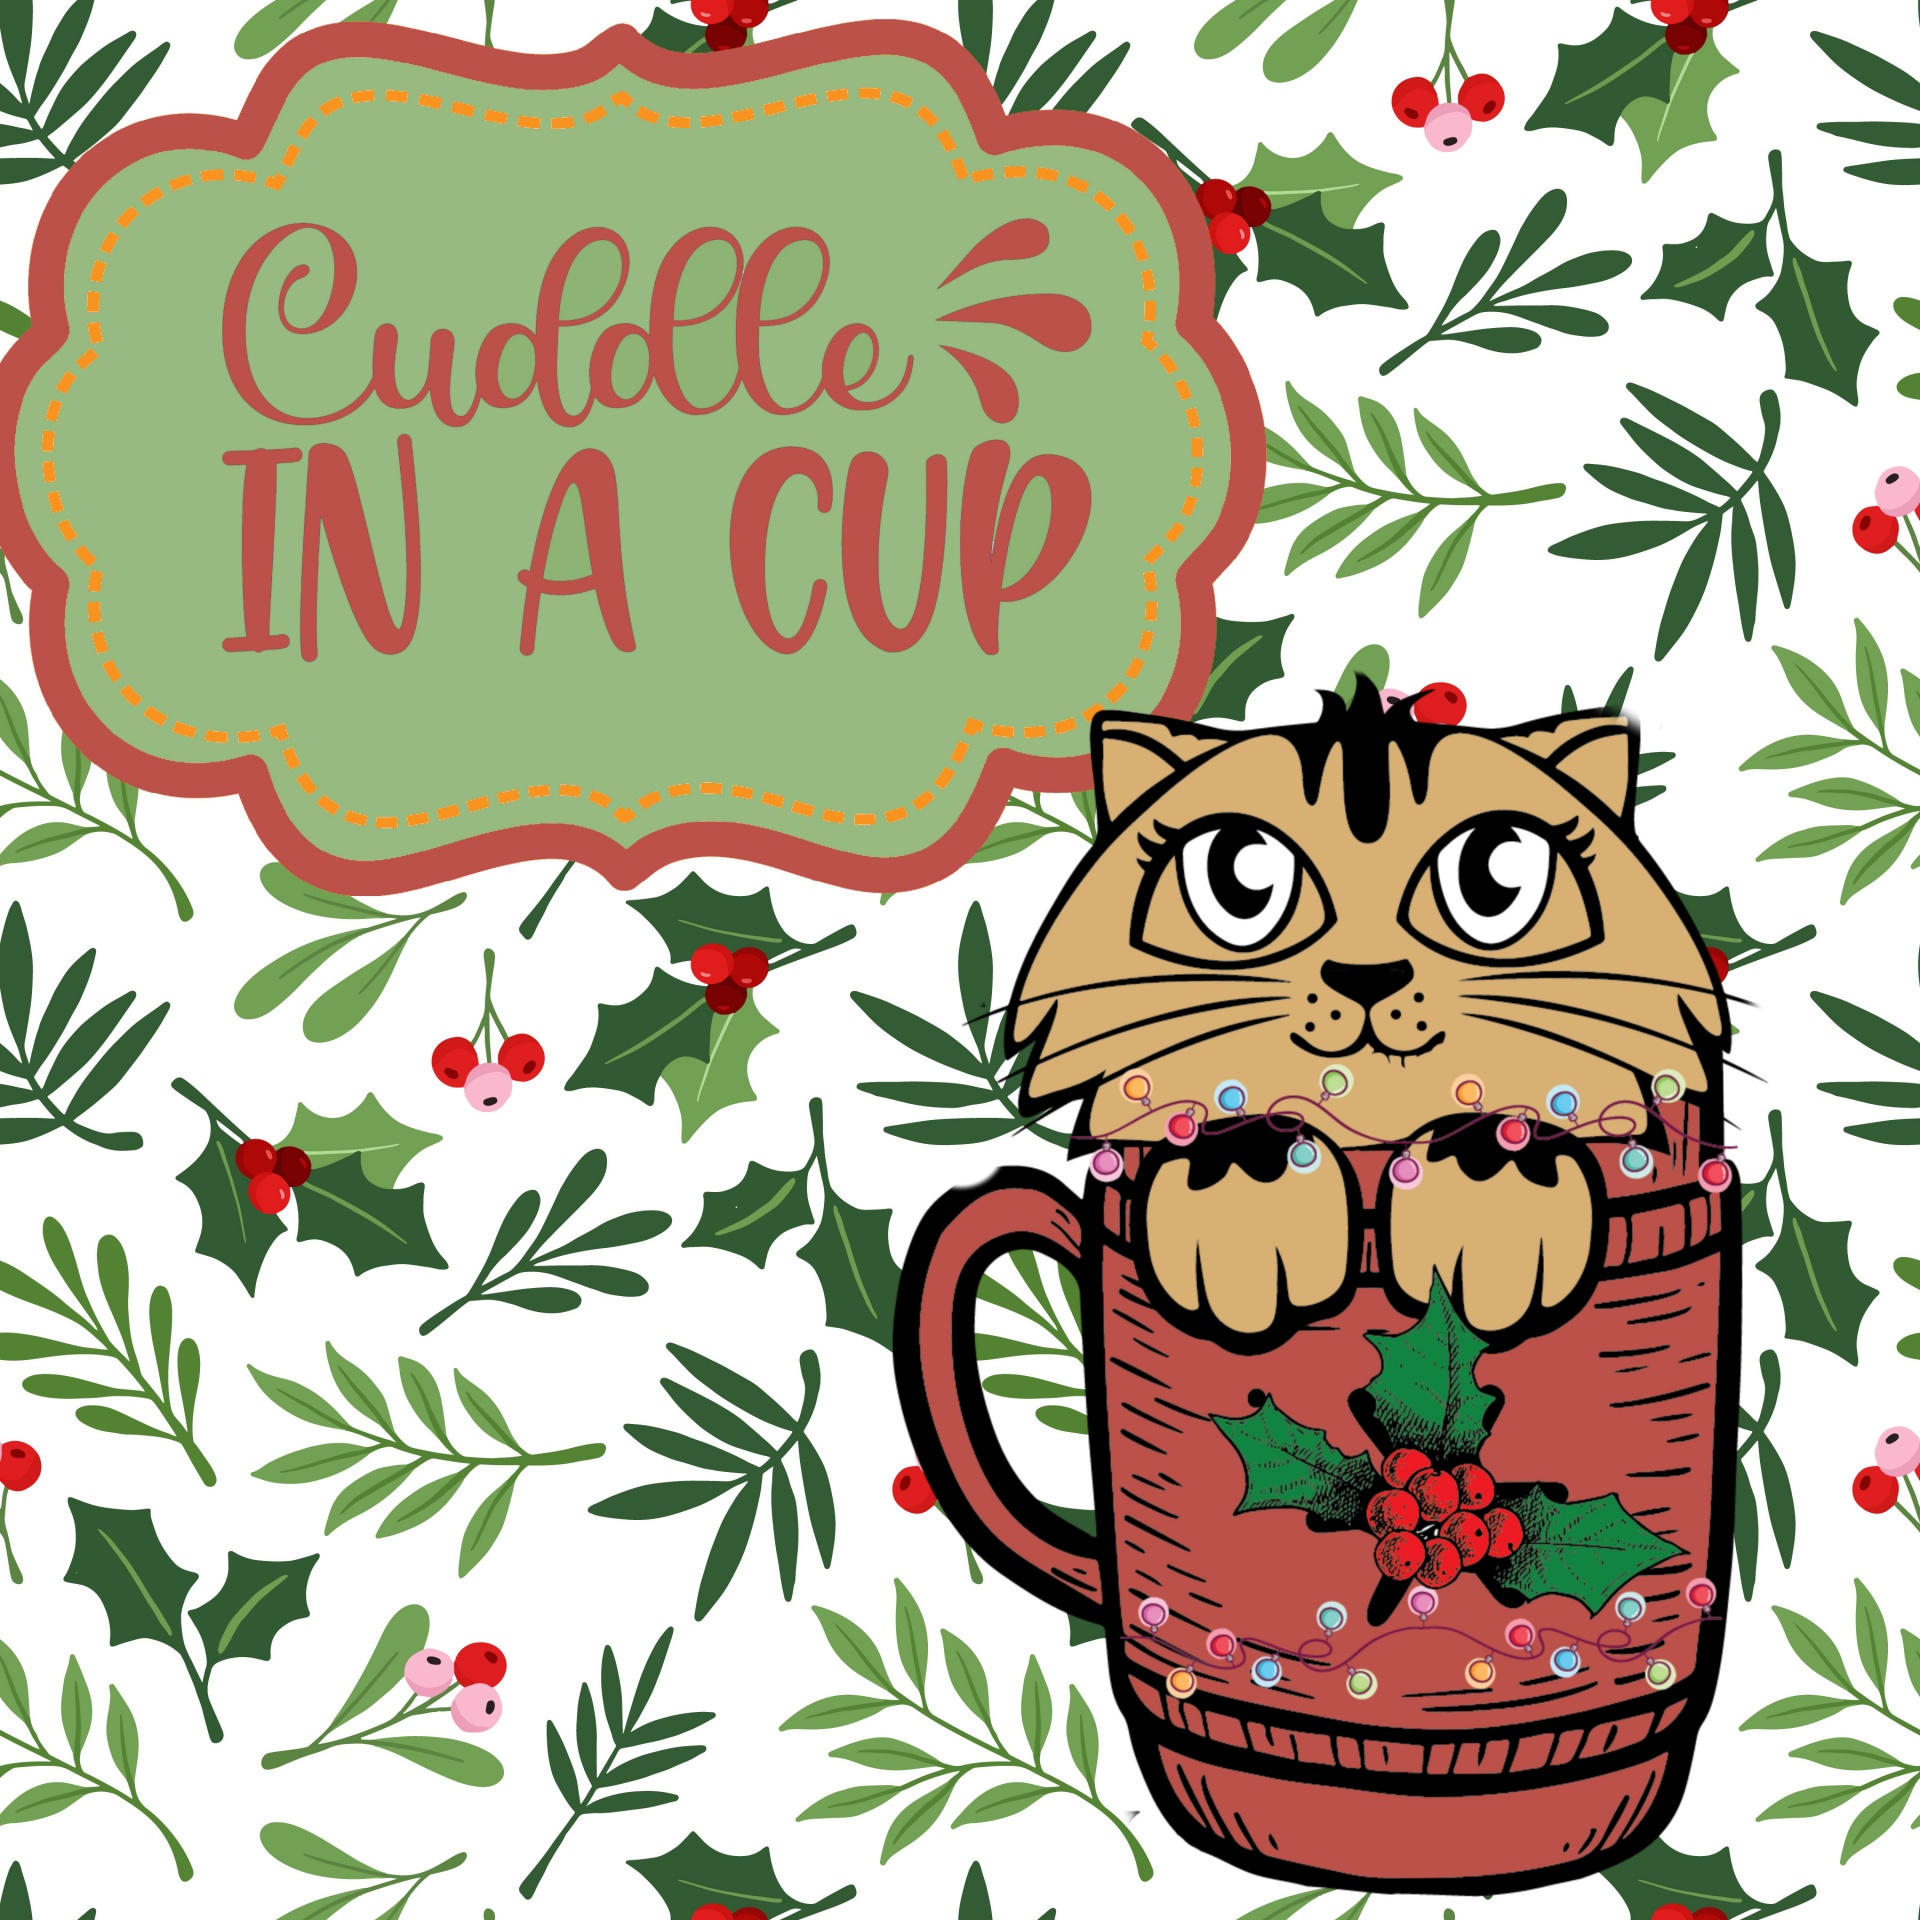 CUDDLE IN A CUP darling holiday illustration featuring a cat in a mug on a holly and berry pattern background